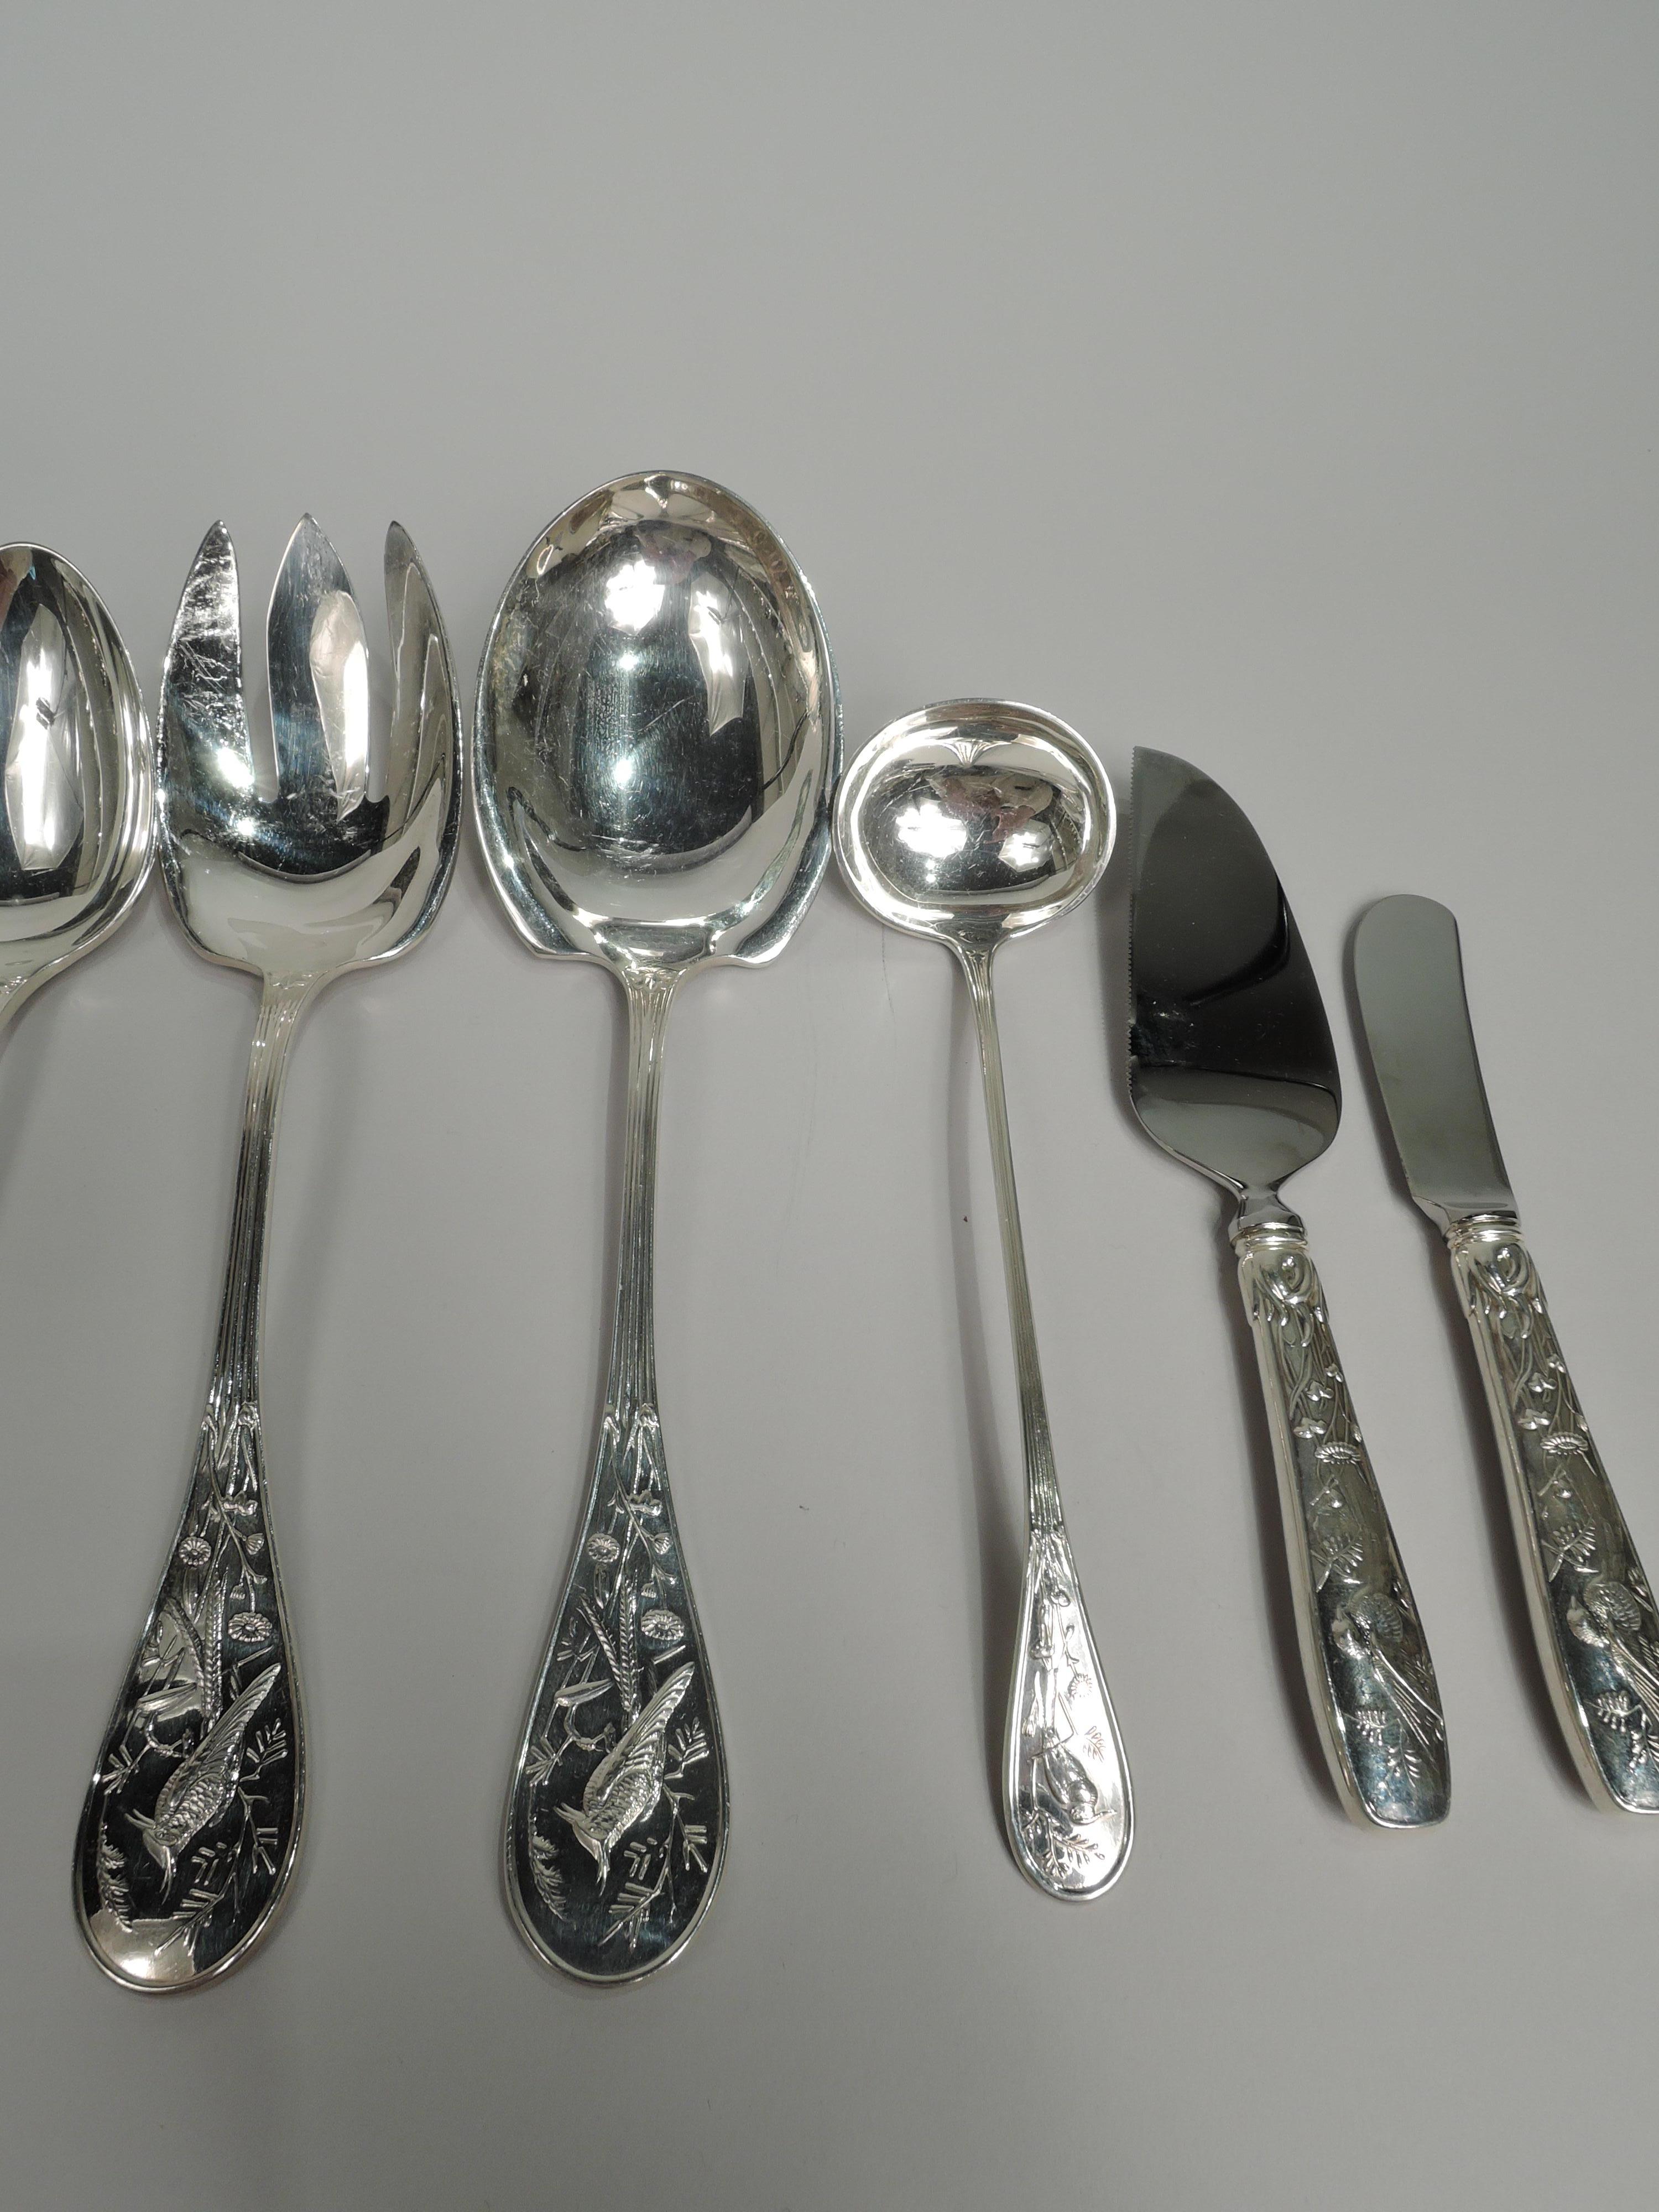 20th Century Tiffany Audubon Sterling Silver Dinner Set for 6 with 68 Pieces